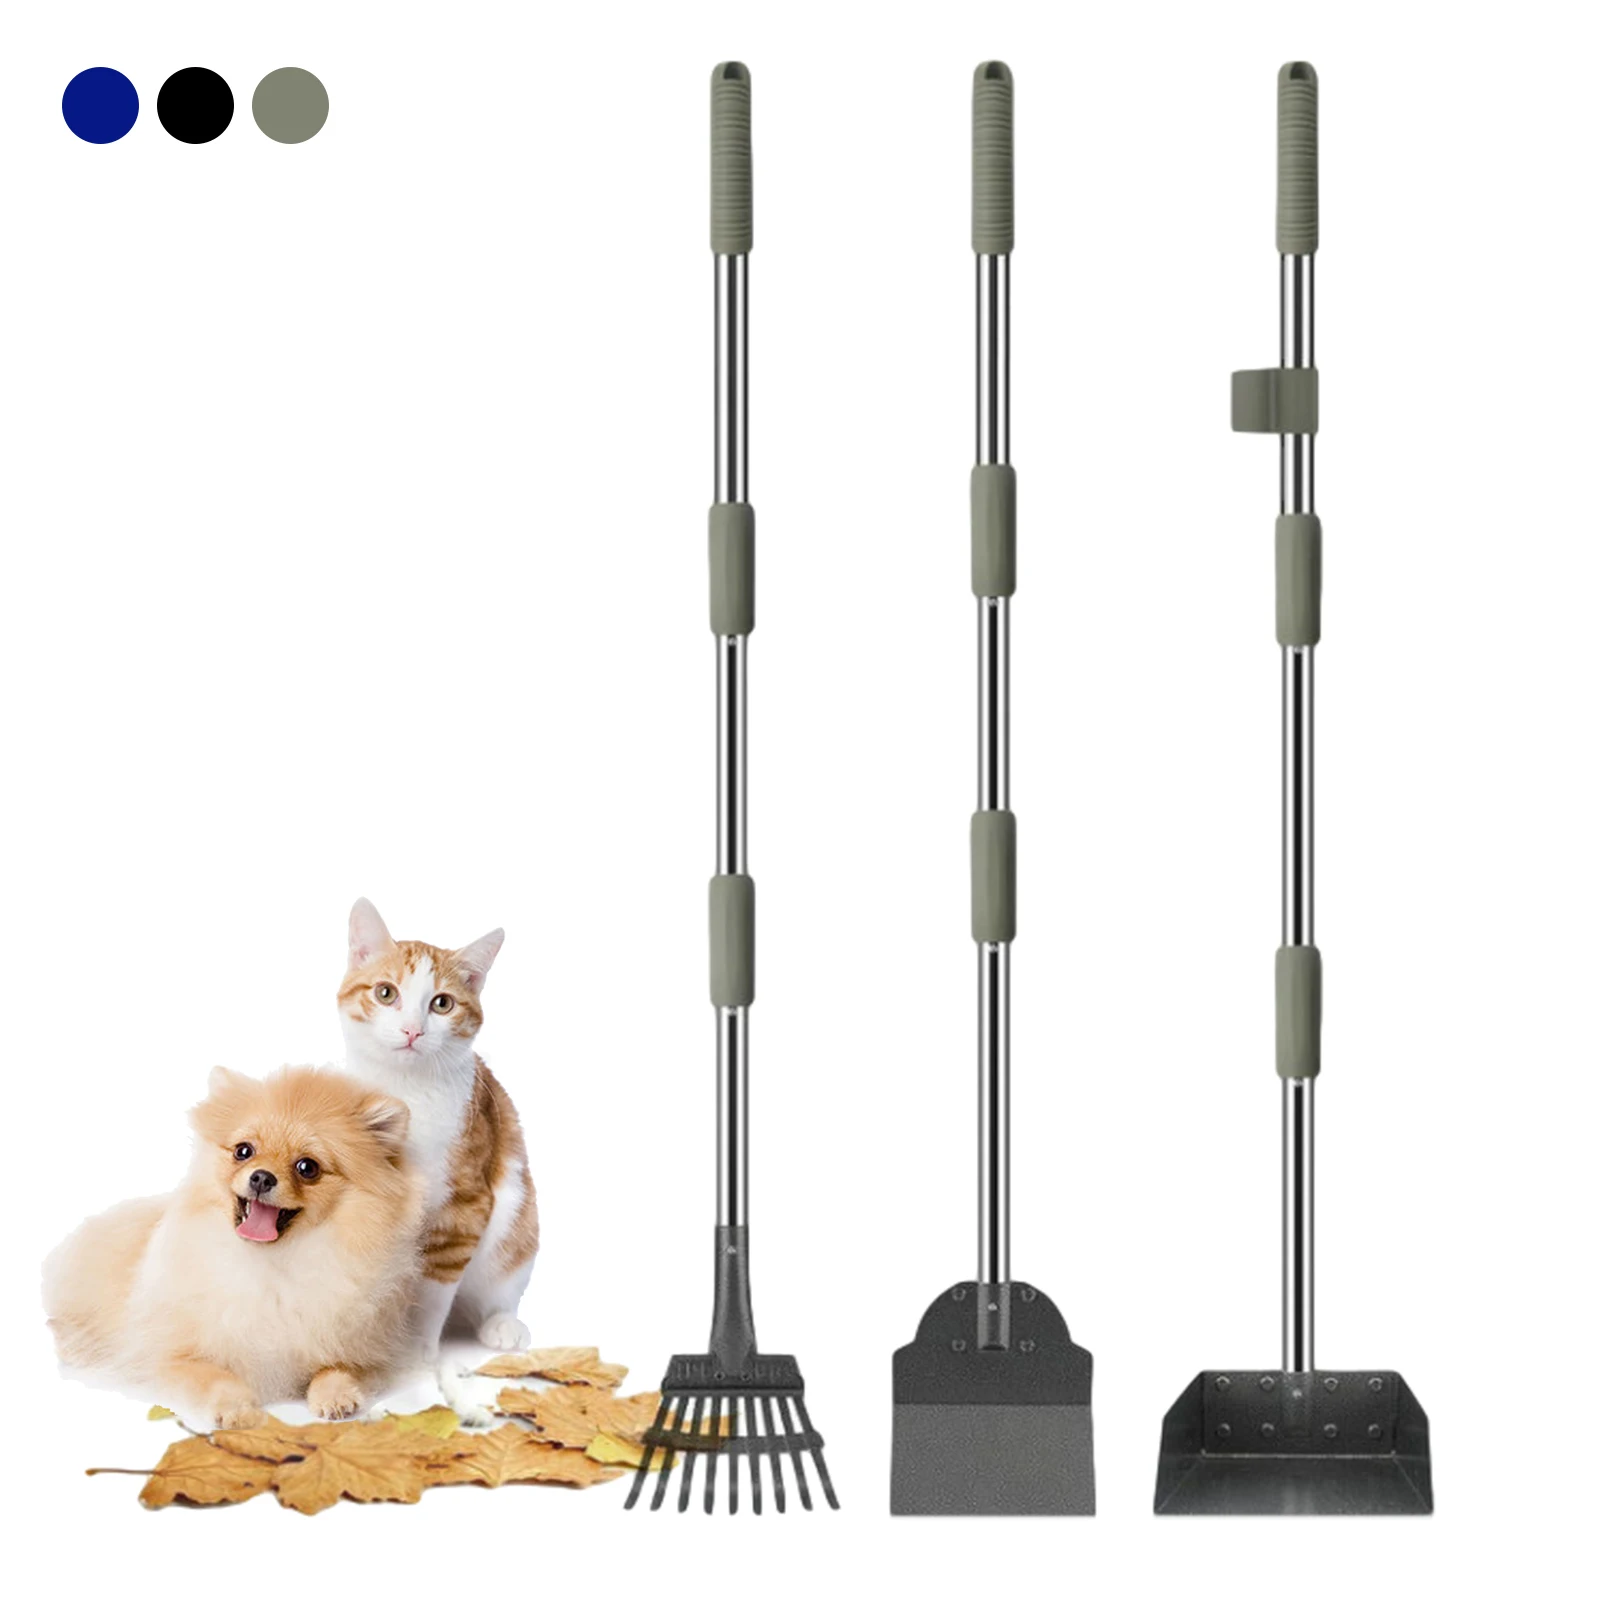 

Dog Pooper Scooper Pet Poop Broom 3PCS Detachable With Metal Rake Tray Spade For Pets Grass Dirt Gravel Cleaning Supplies